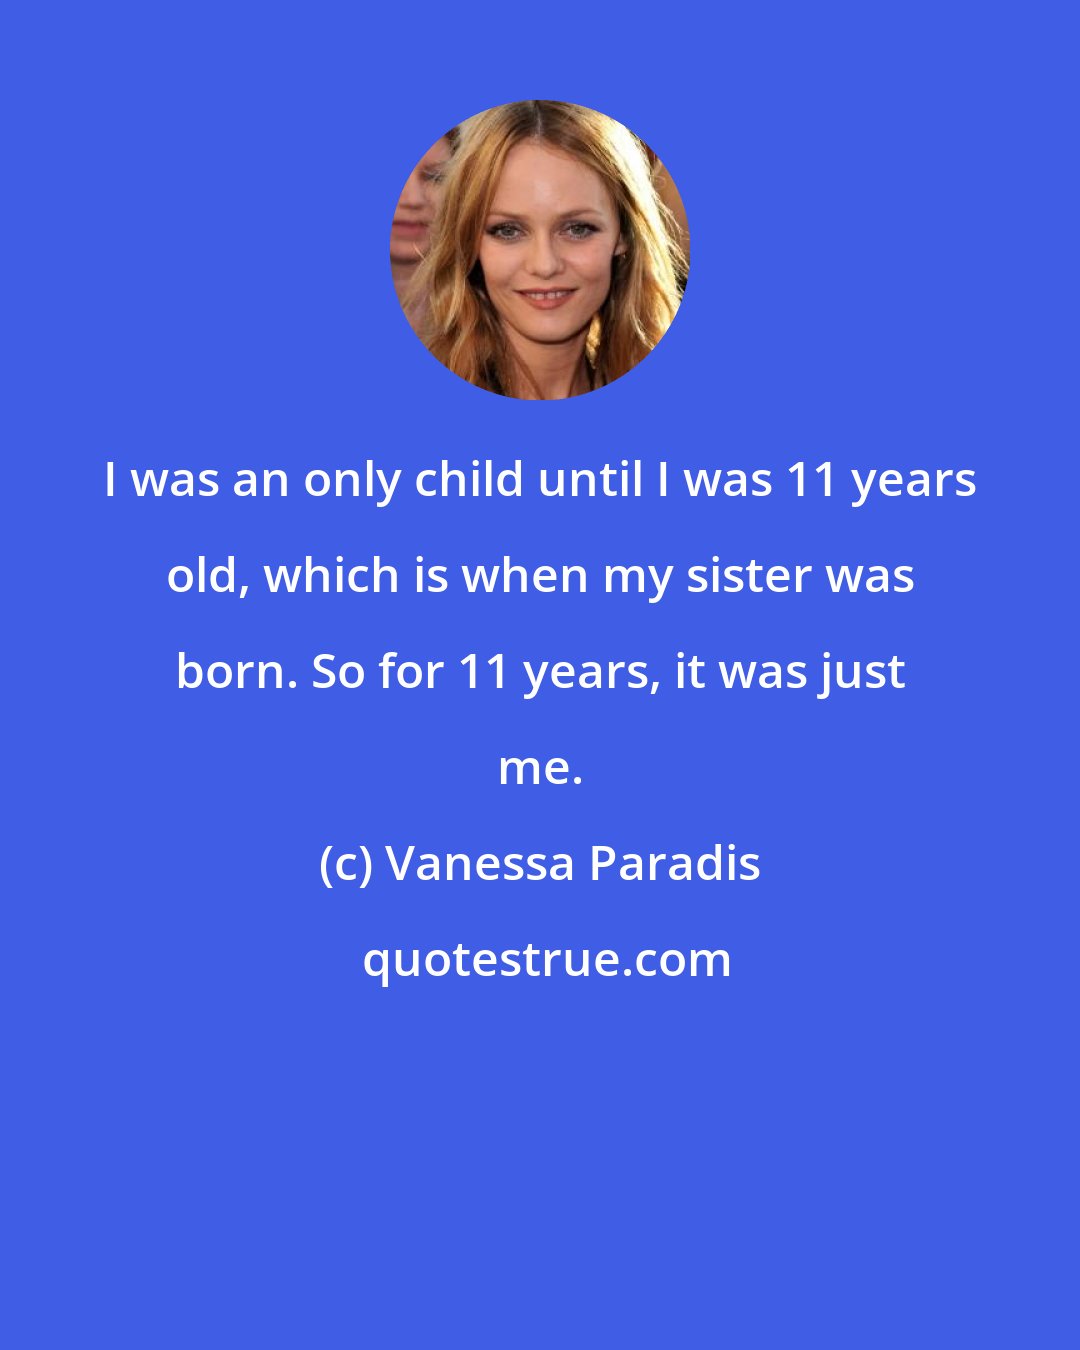 Vanessa Paradis: I was an only child until I was 11 years old, which is when my sister was born. So for 11 years, it was just me.